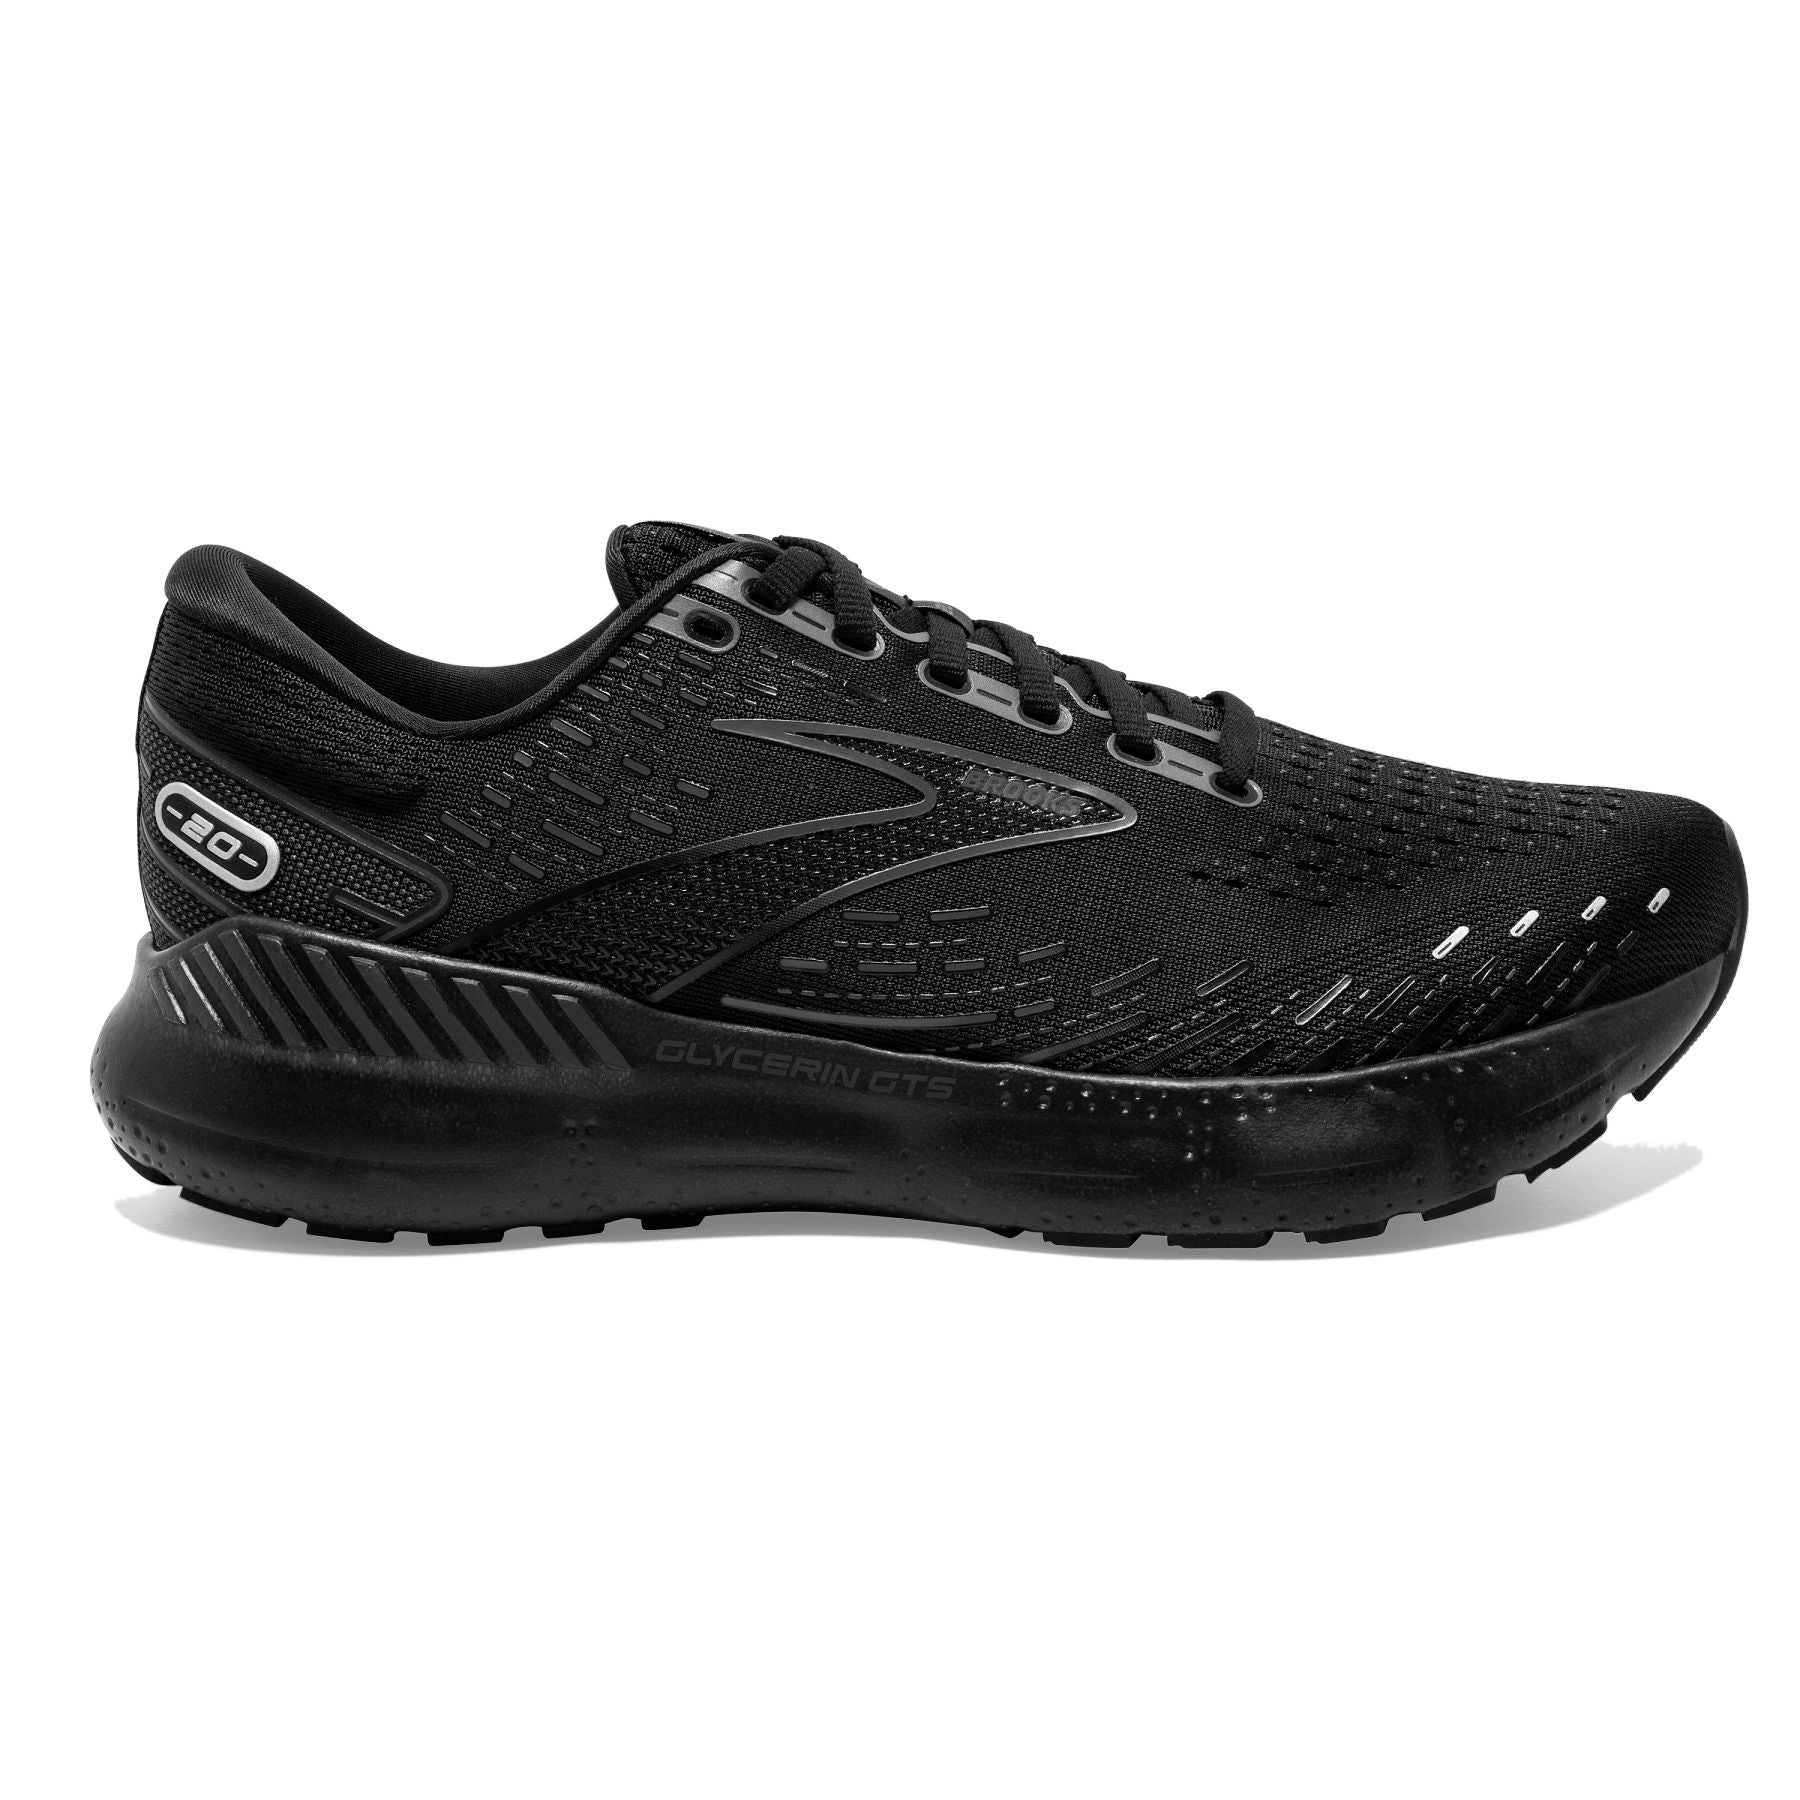 Lateral view of the Men's Glycerin GTS 20 by BROOKS in the color Black/Black/Ebony